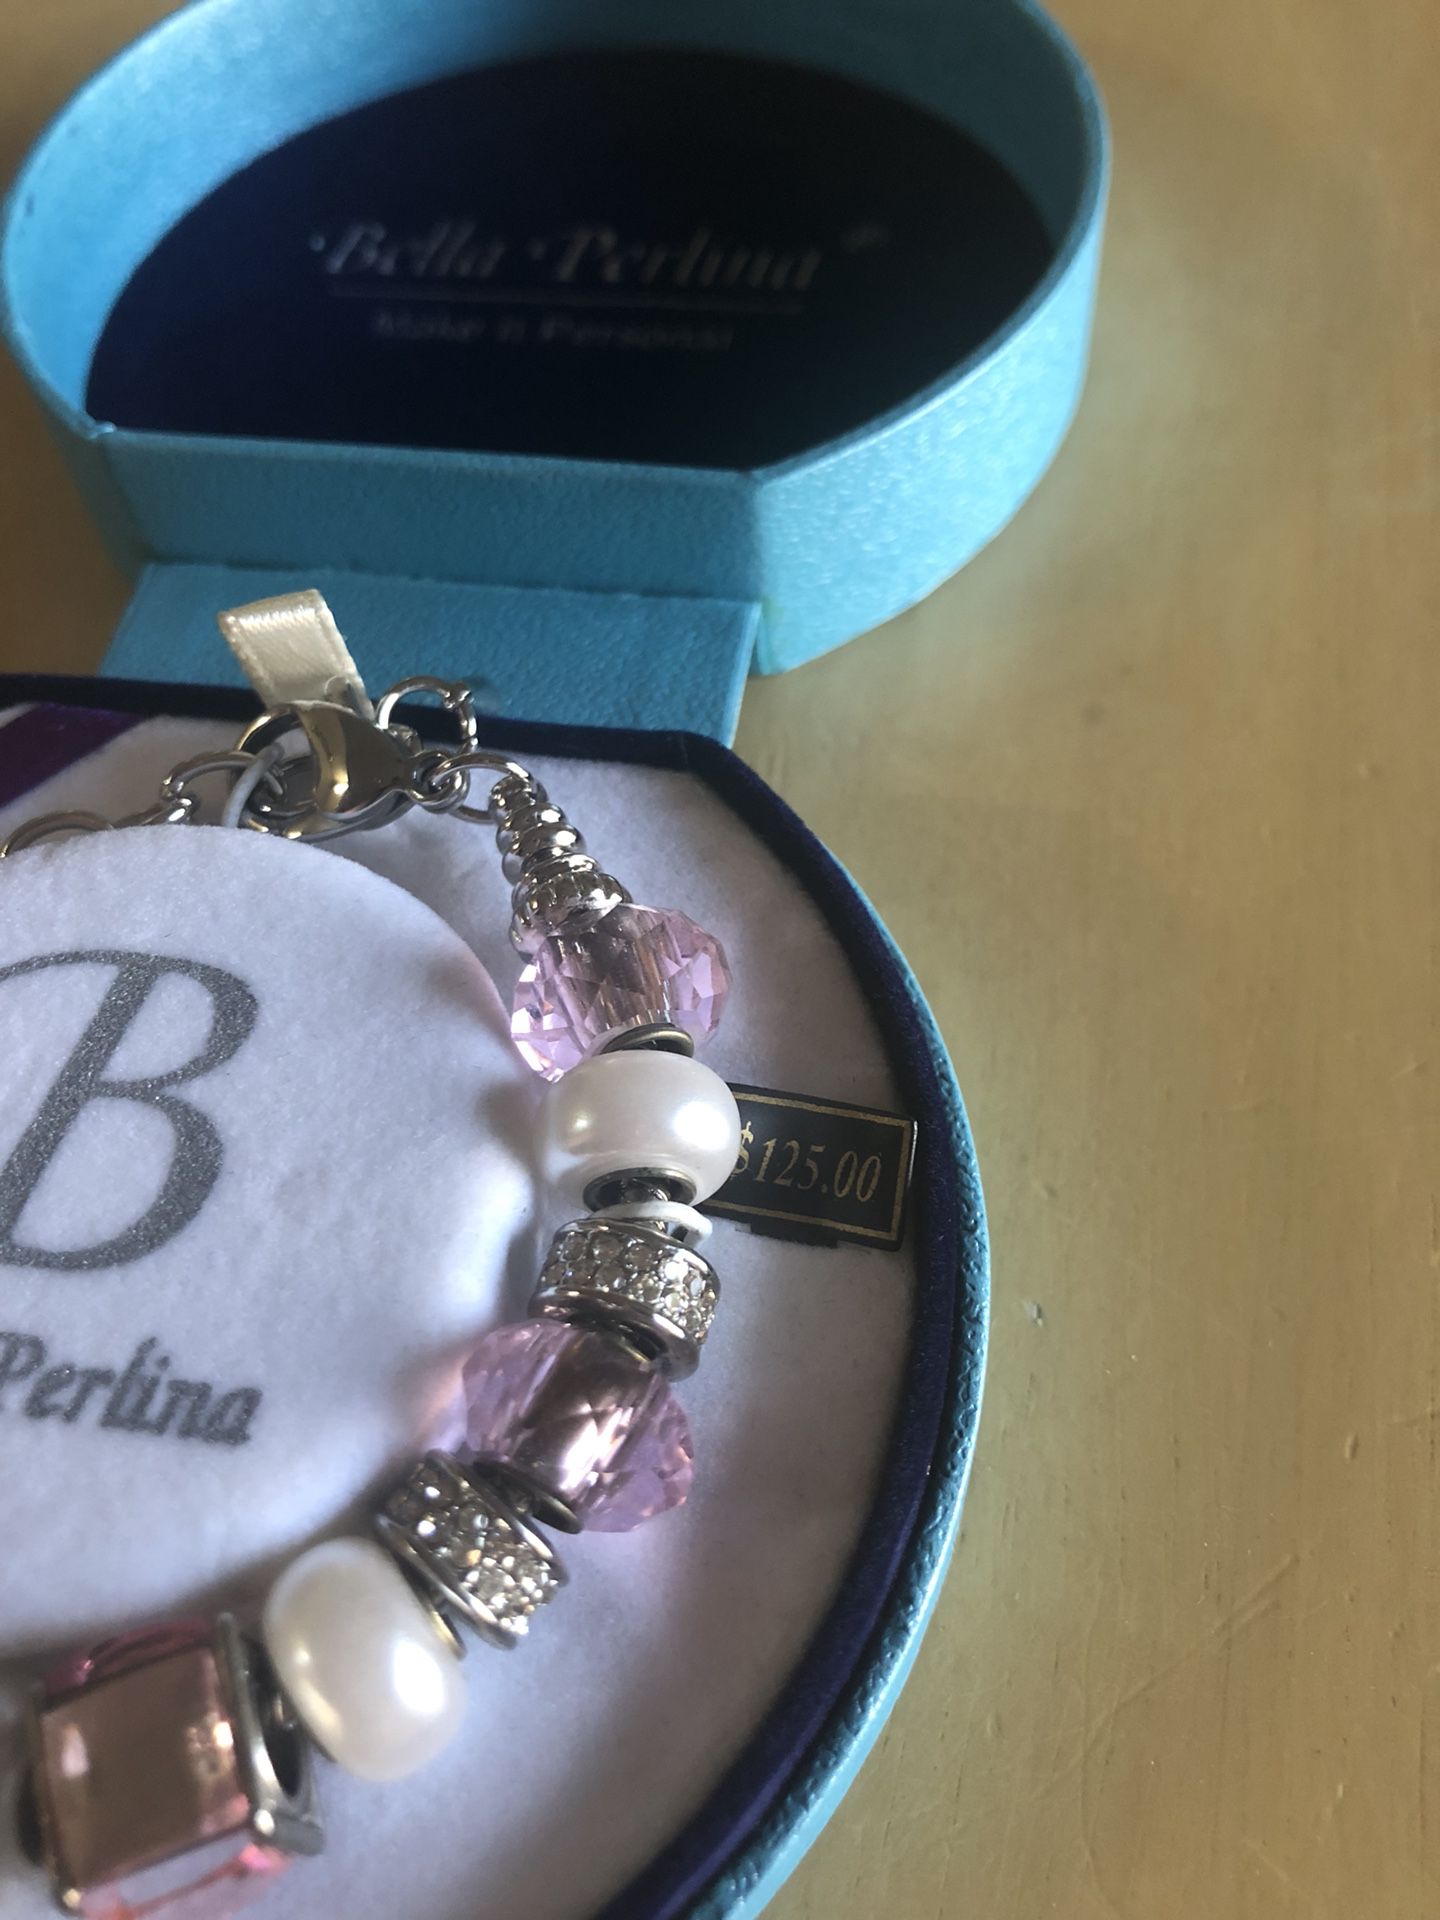 Bella Perlina 925 Sterling silver bracelet with full set of charms for sale, brand new in box